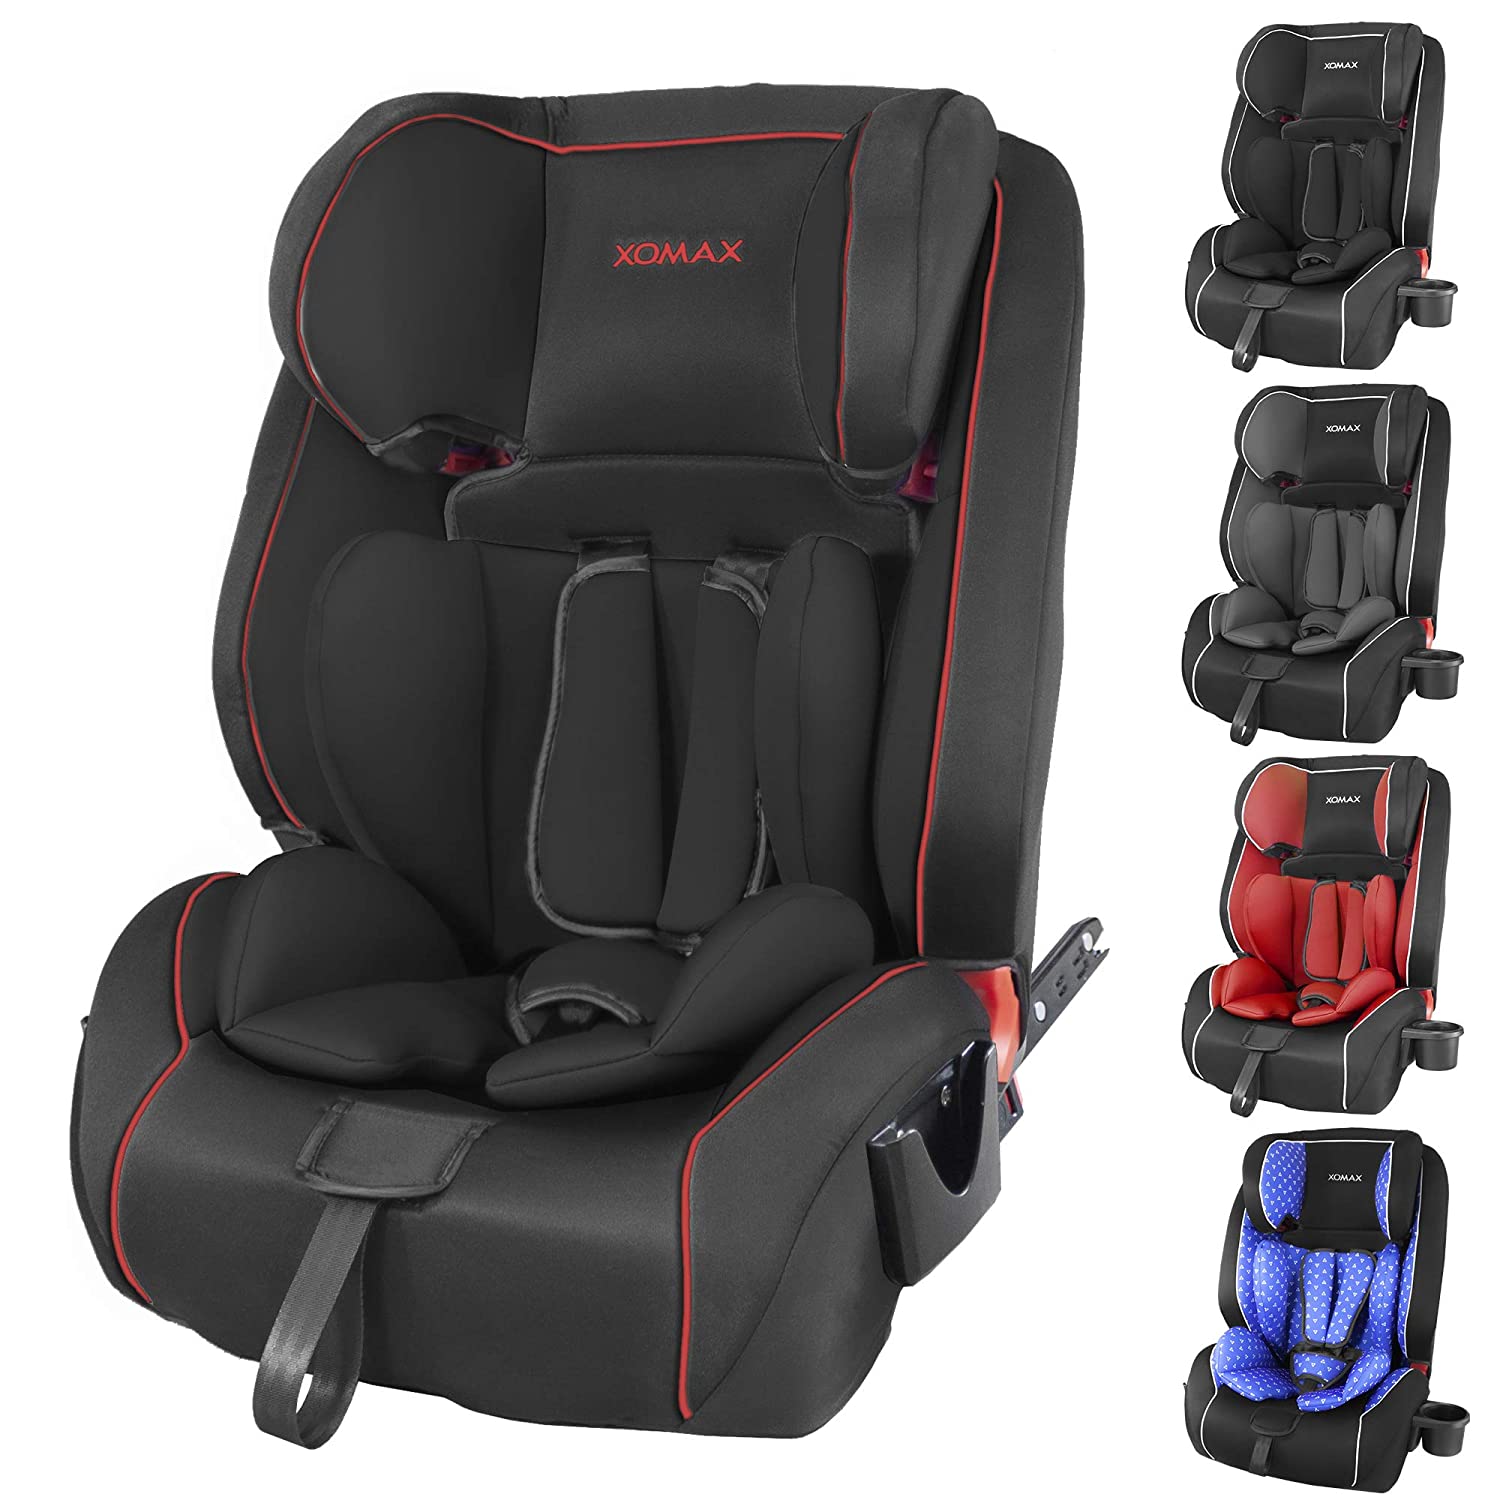 Xomax HQ668 Isofix Child Car Seat, 9 - 36 kg with Bottle Holder, Grows with Your Child: 1 - 12 Years, Group 1 / 2 / 3, 5-Point Harness and 3-Point Harness, Removable and Washable Cover, ECE R44/04 black/red